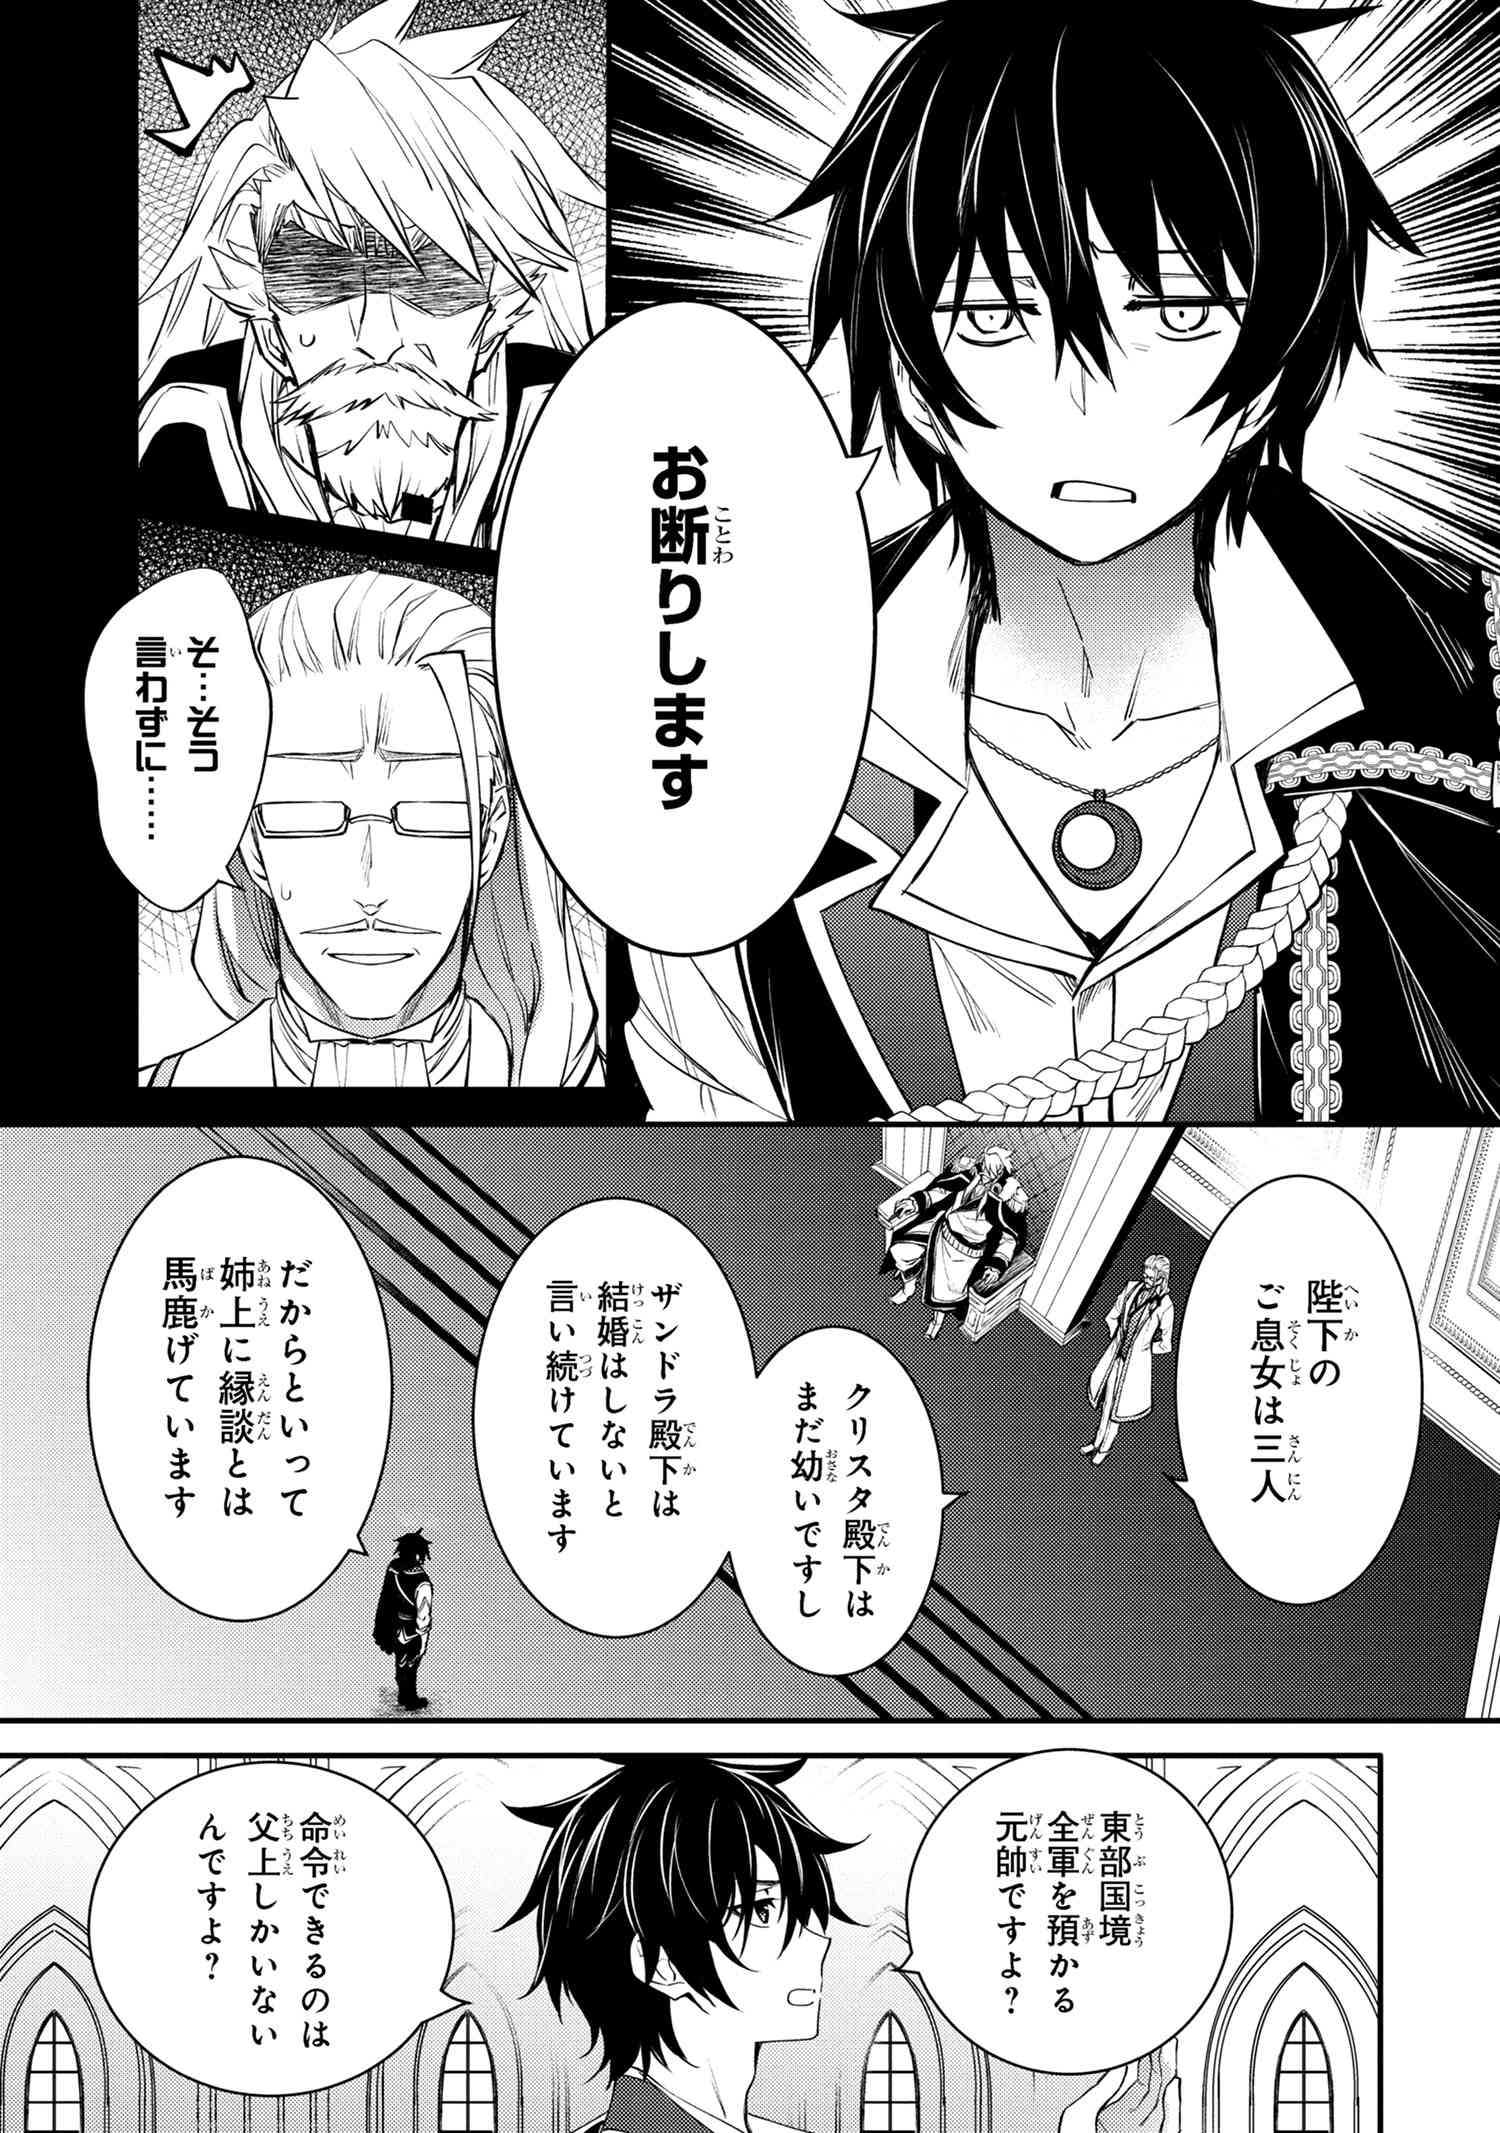 The Strongest Dull Prince’s Secret Battle for the Throne - Chapter 41.1 - Page 3